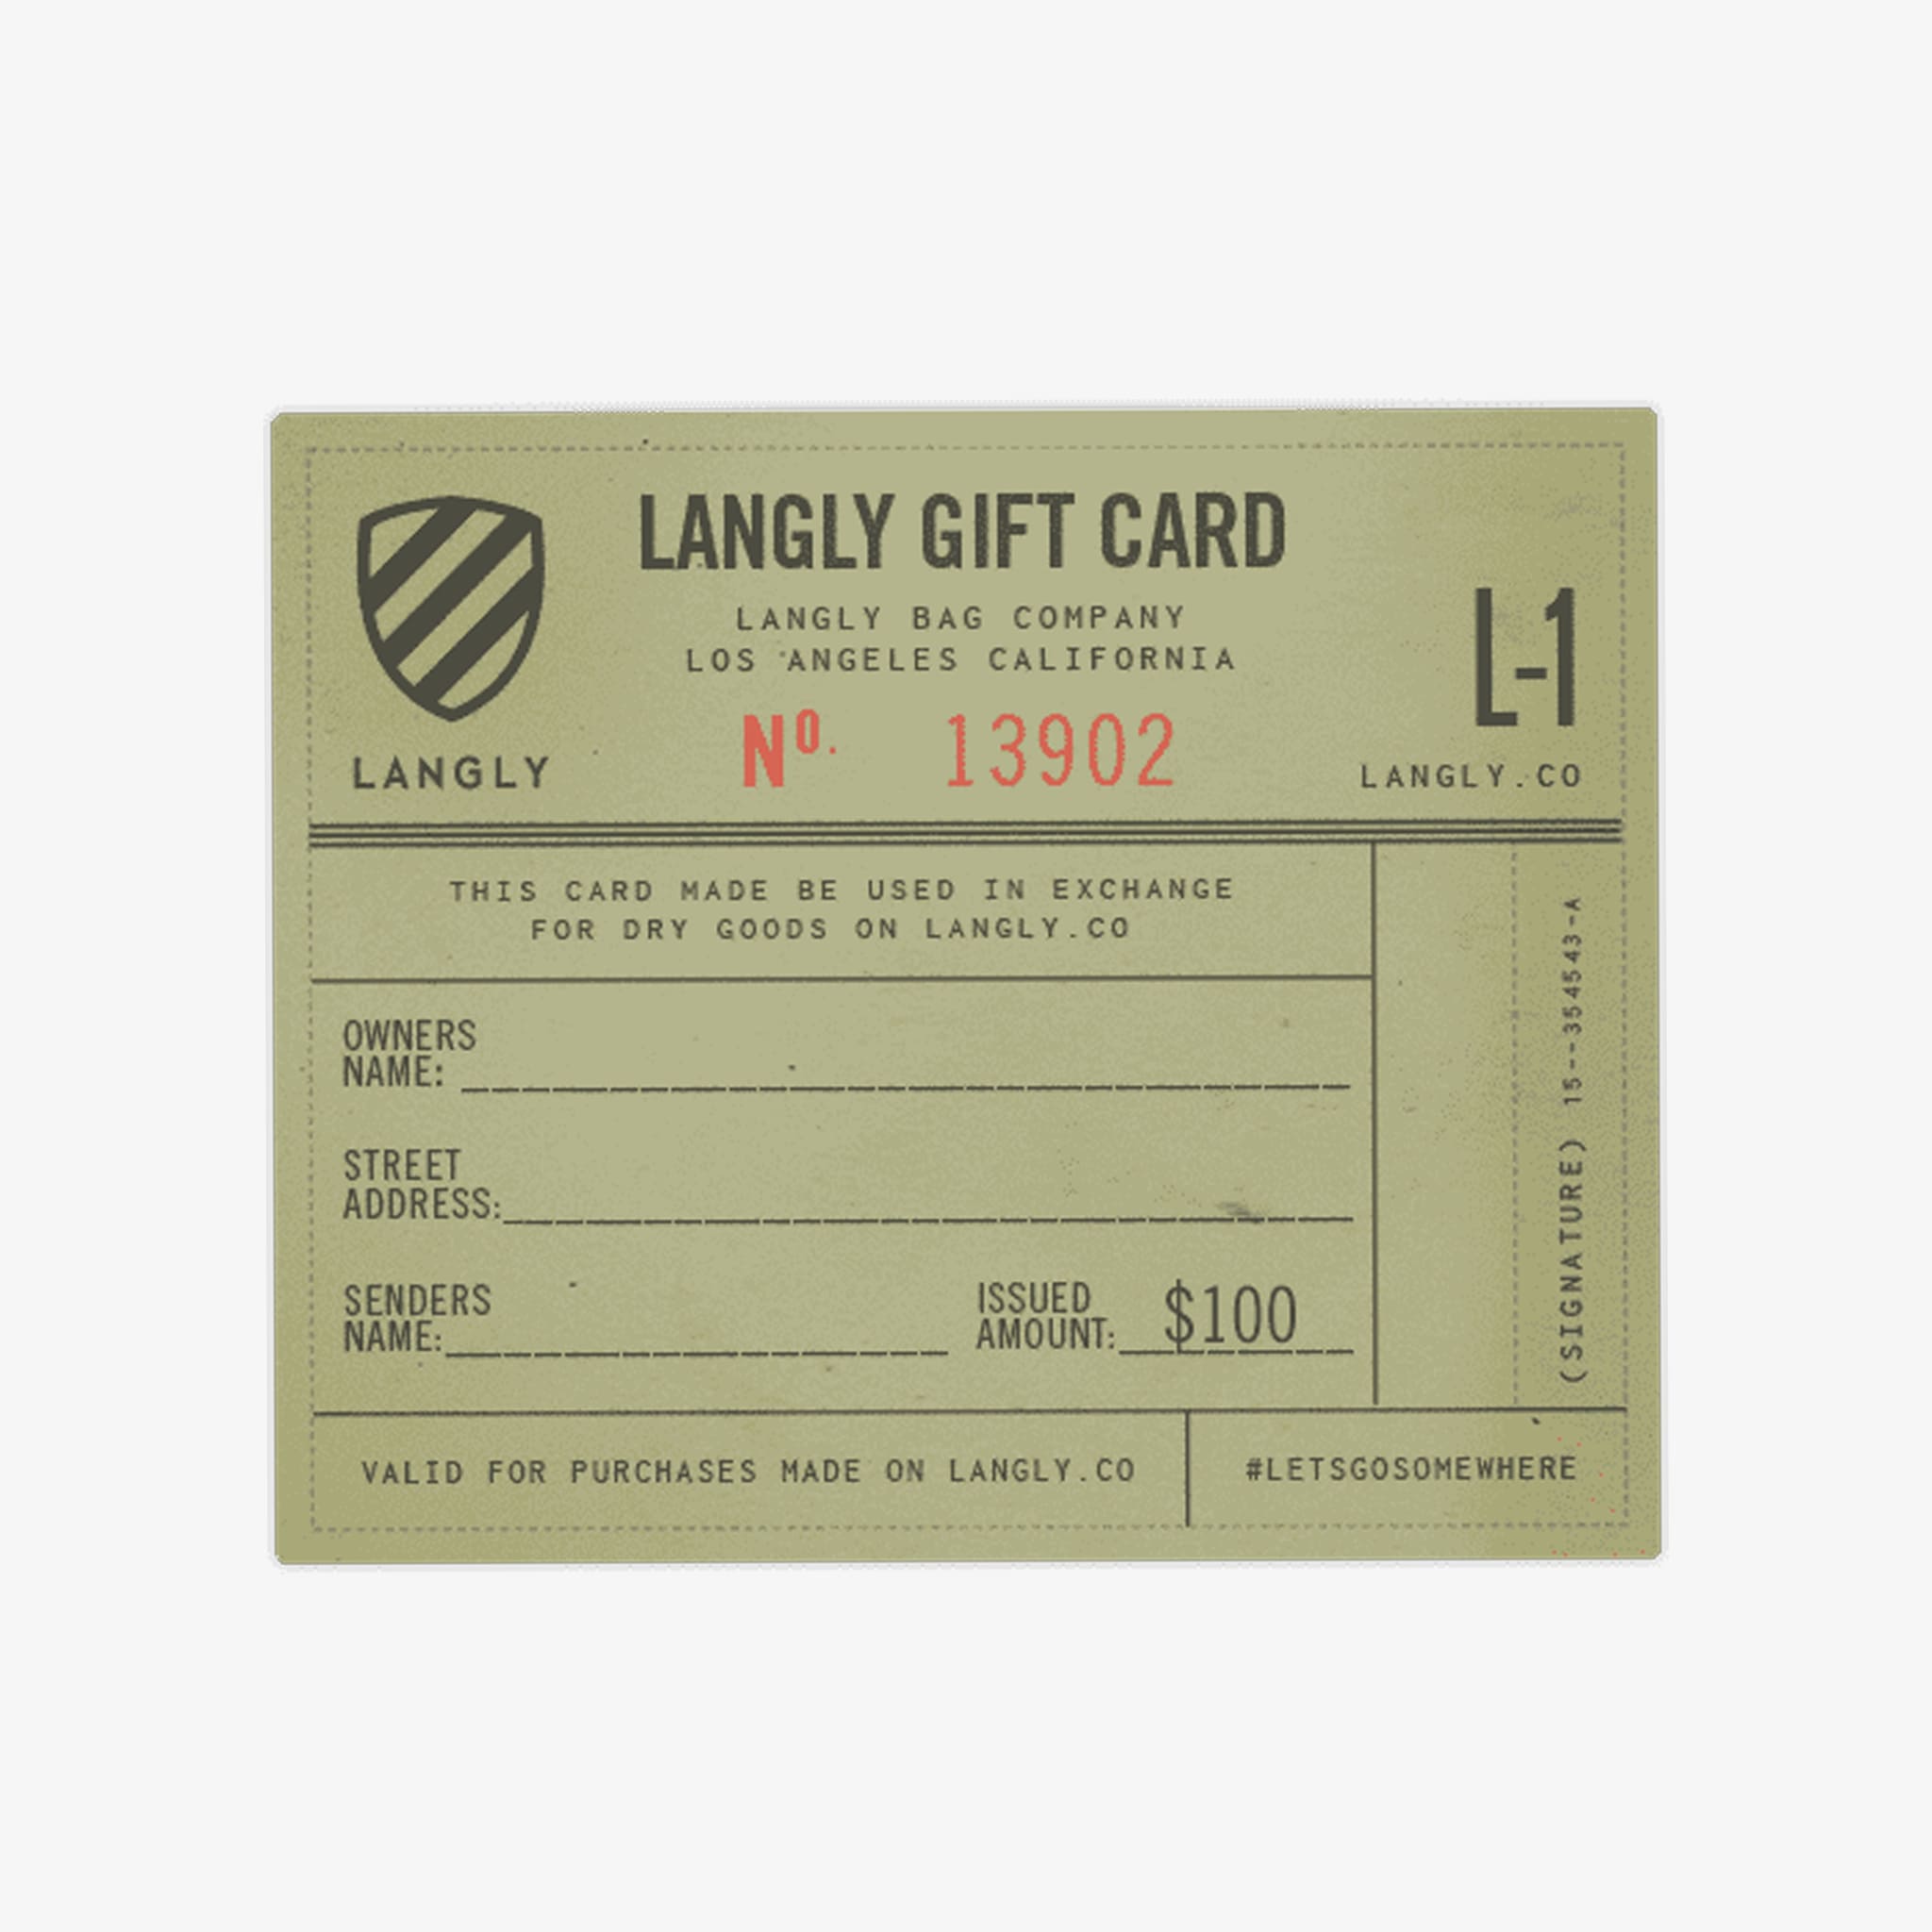 Langly-camera-bags-straps-gift-card.jpg